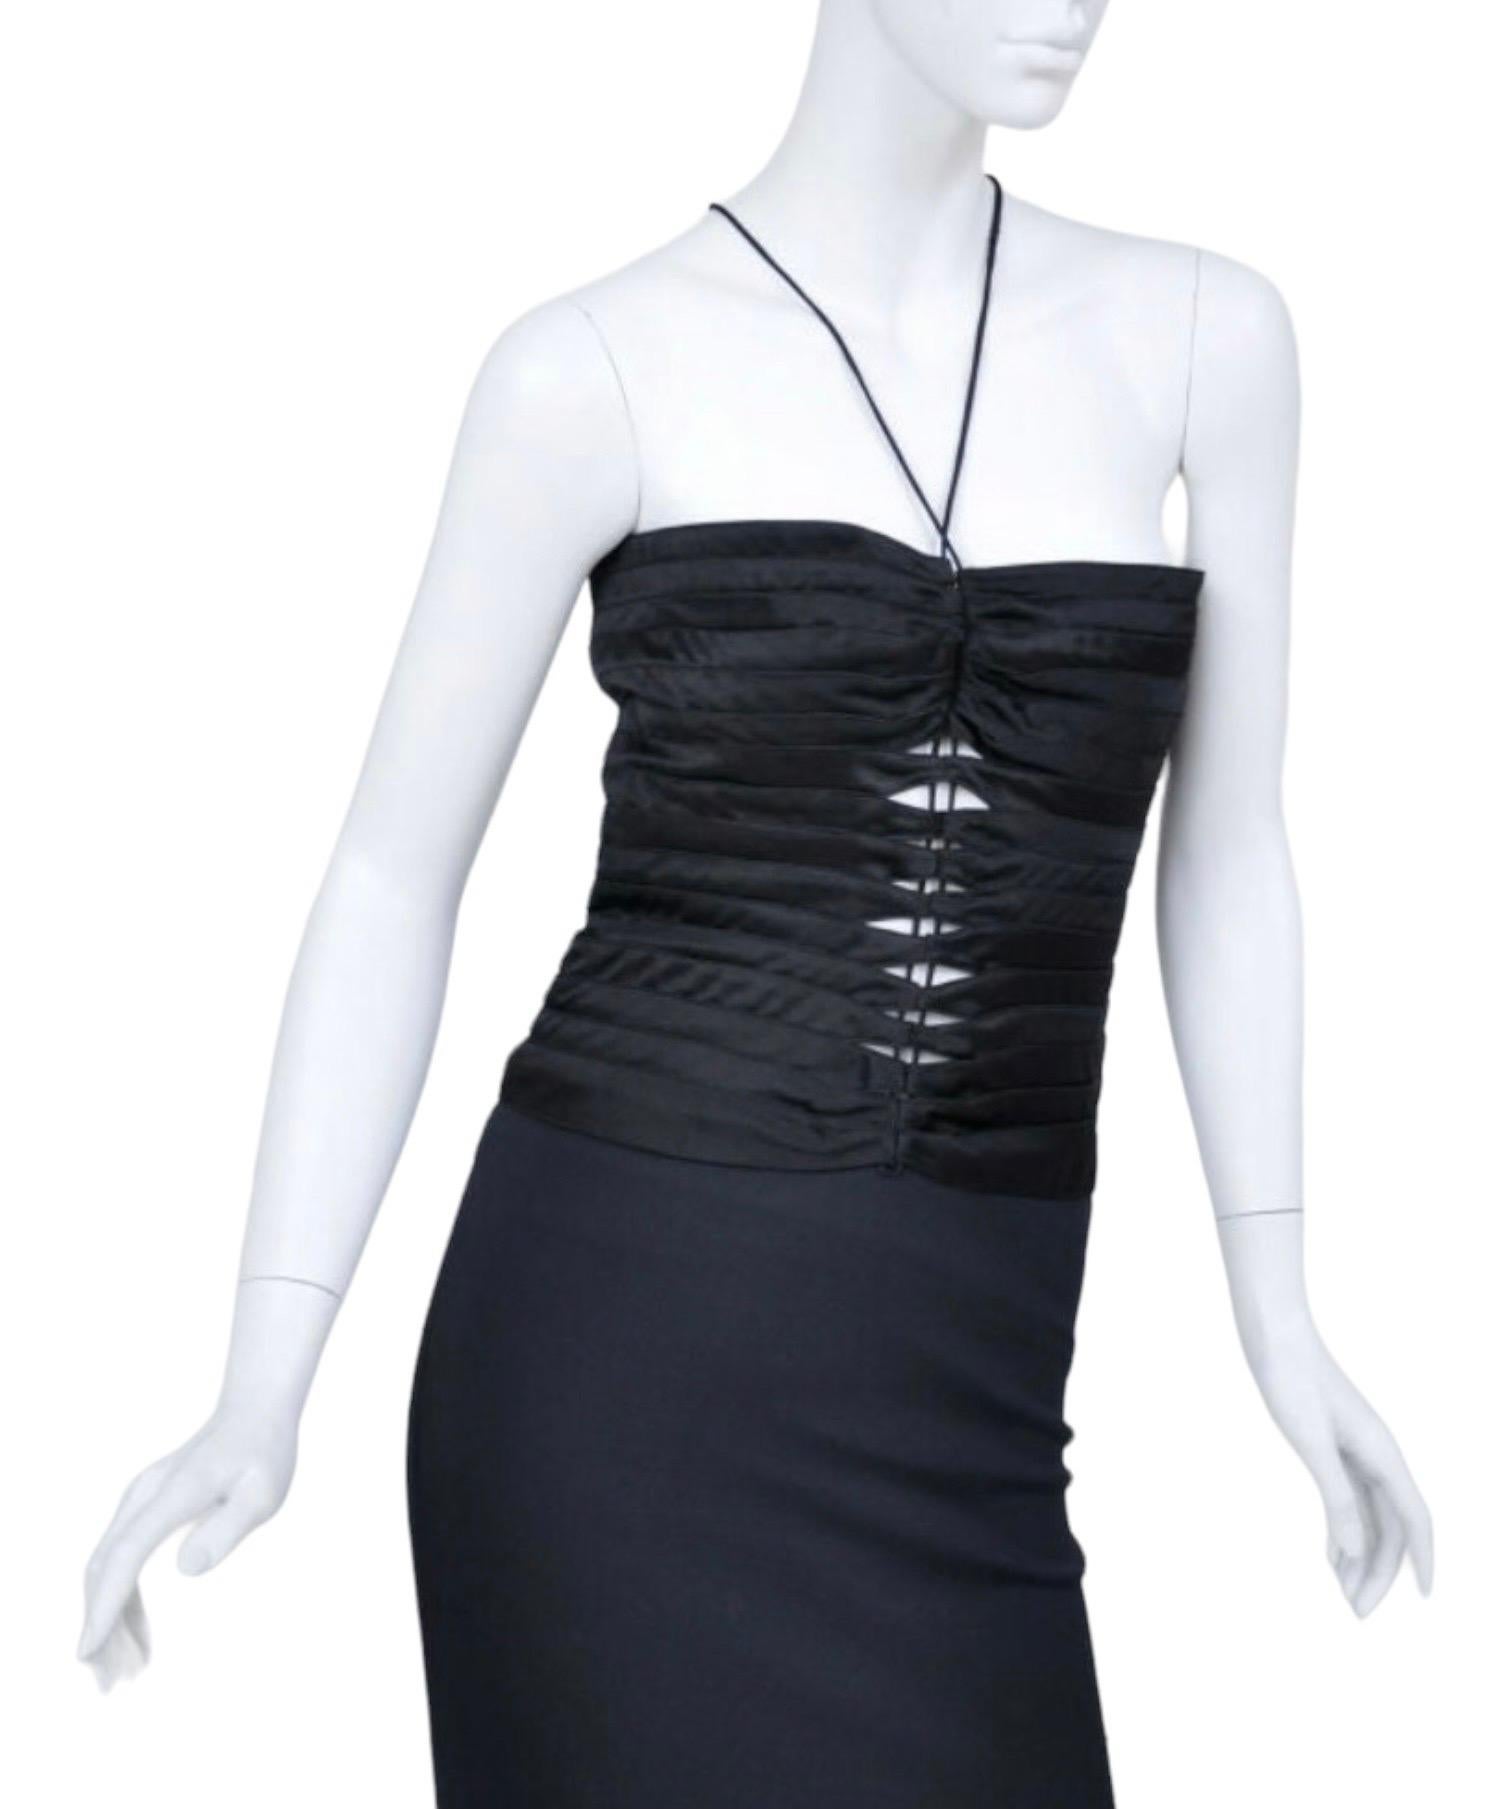 F/W 2002 Vintage Tom Ford for Gucci Black Evening Gown Dress NWT! Size 42 In New Condition For Sale In Montgomery, TX